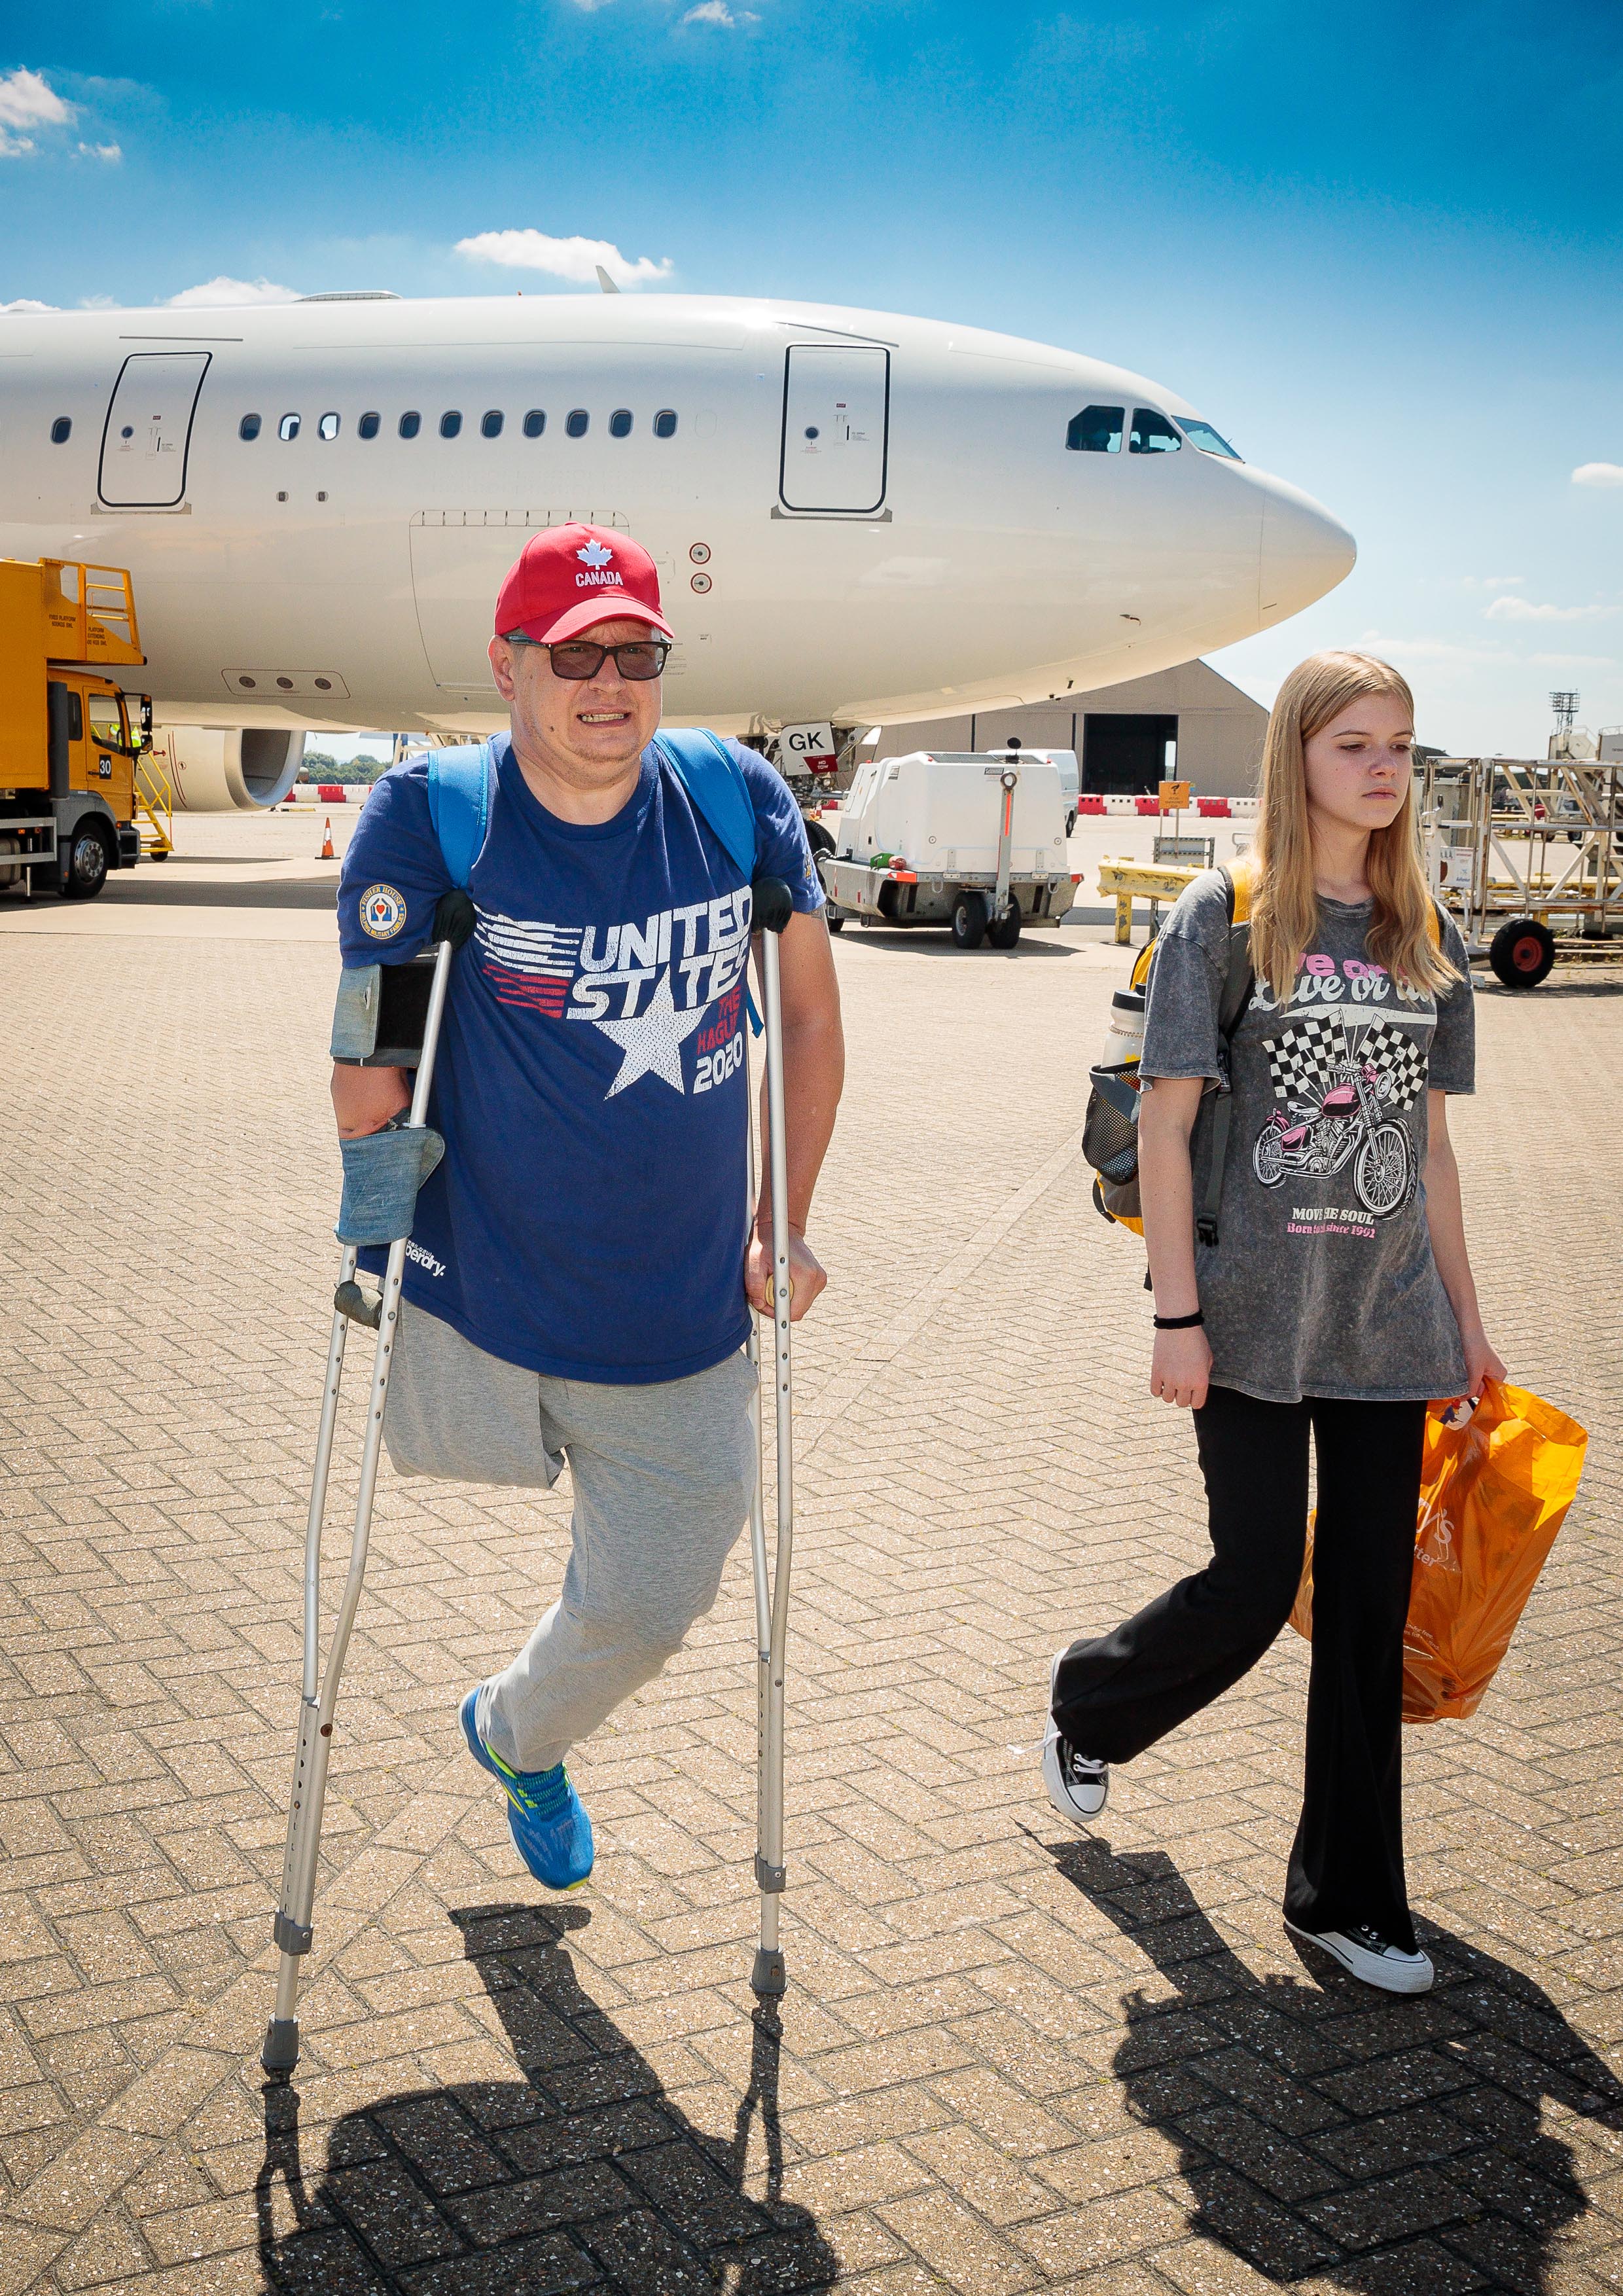 Image shows athlete with one leg on crutches and another on the airfield.